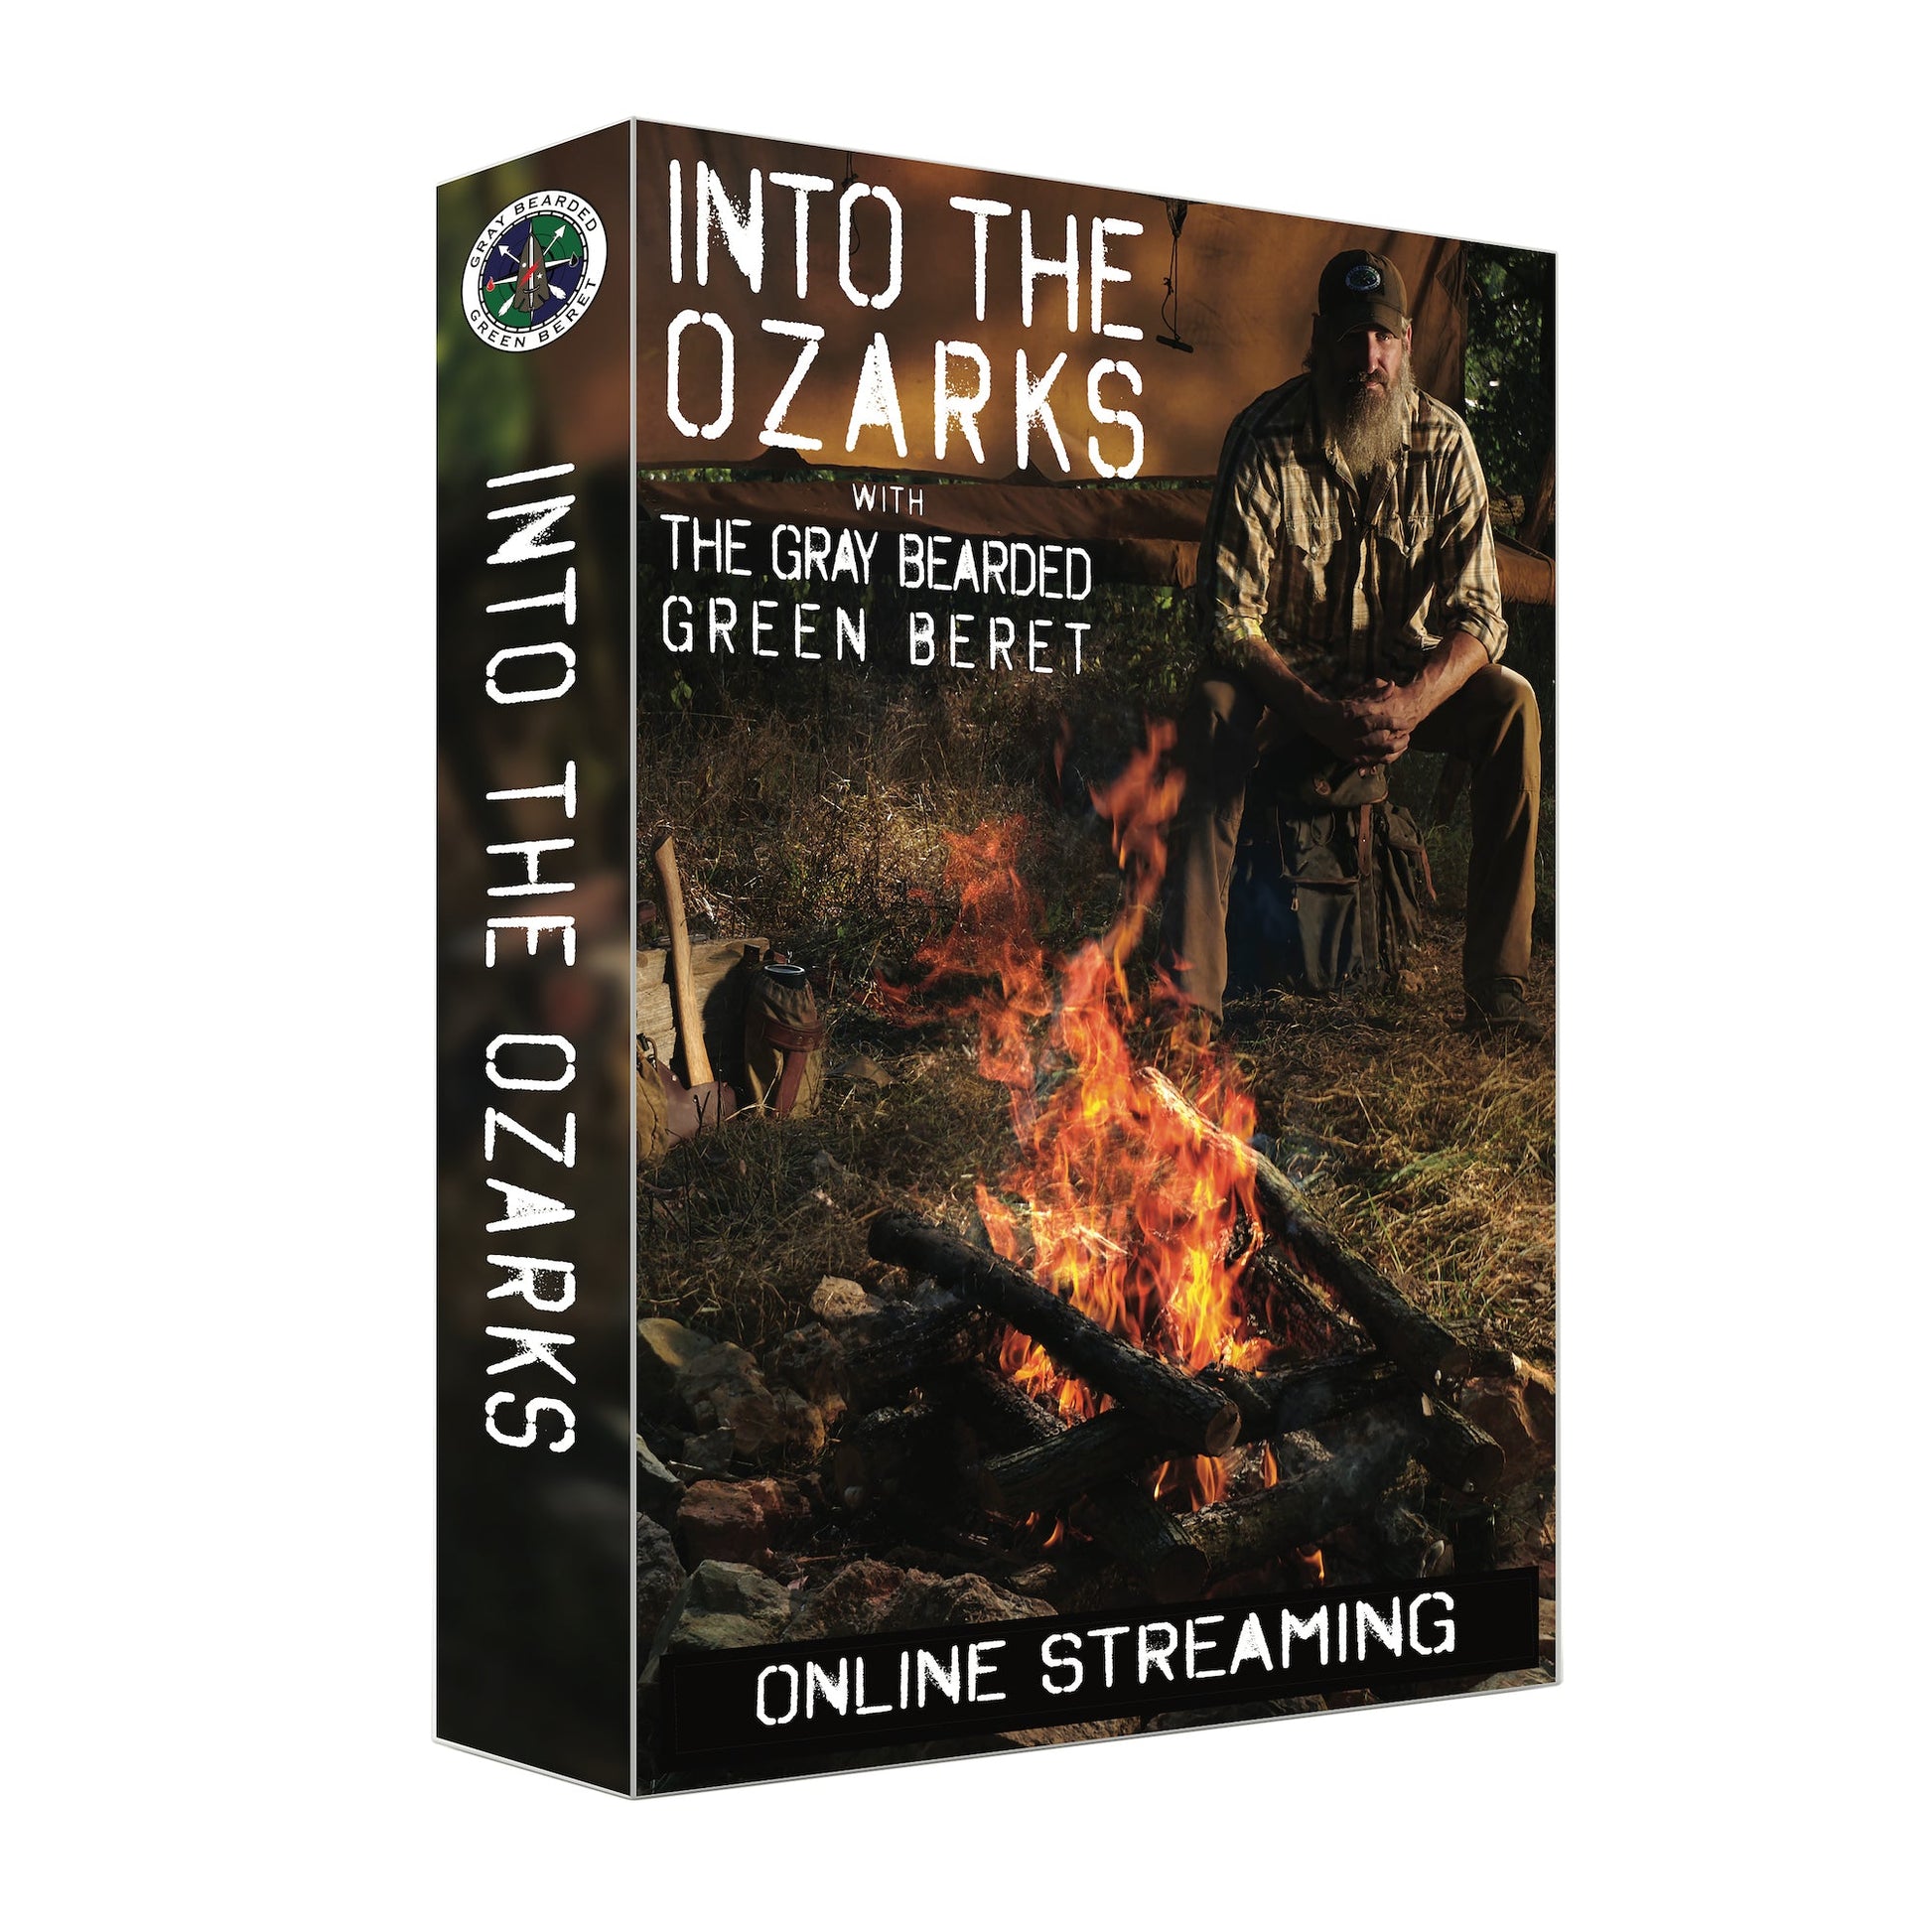 Into the Ozarks (Online Streaming) - Gray Bearded Green Beret